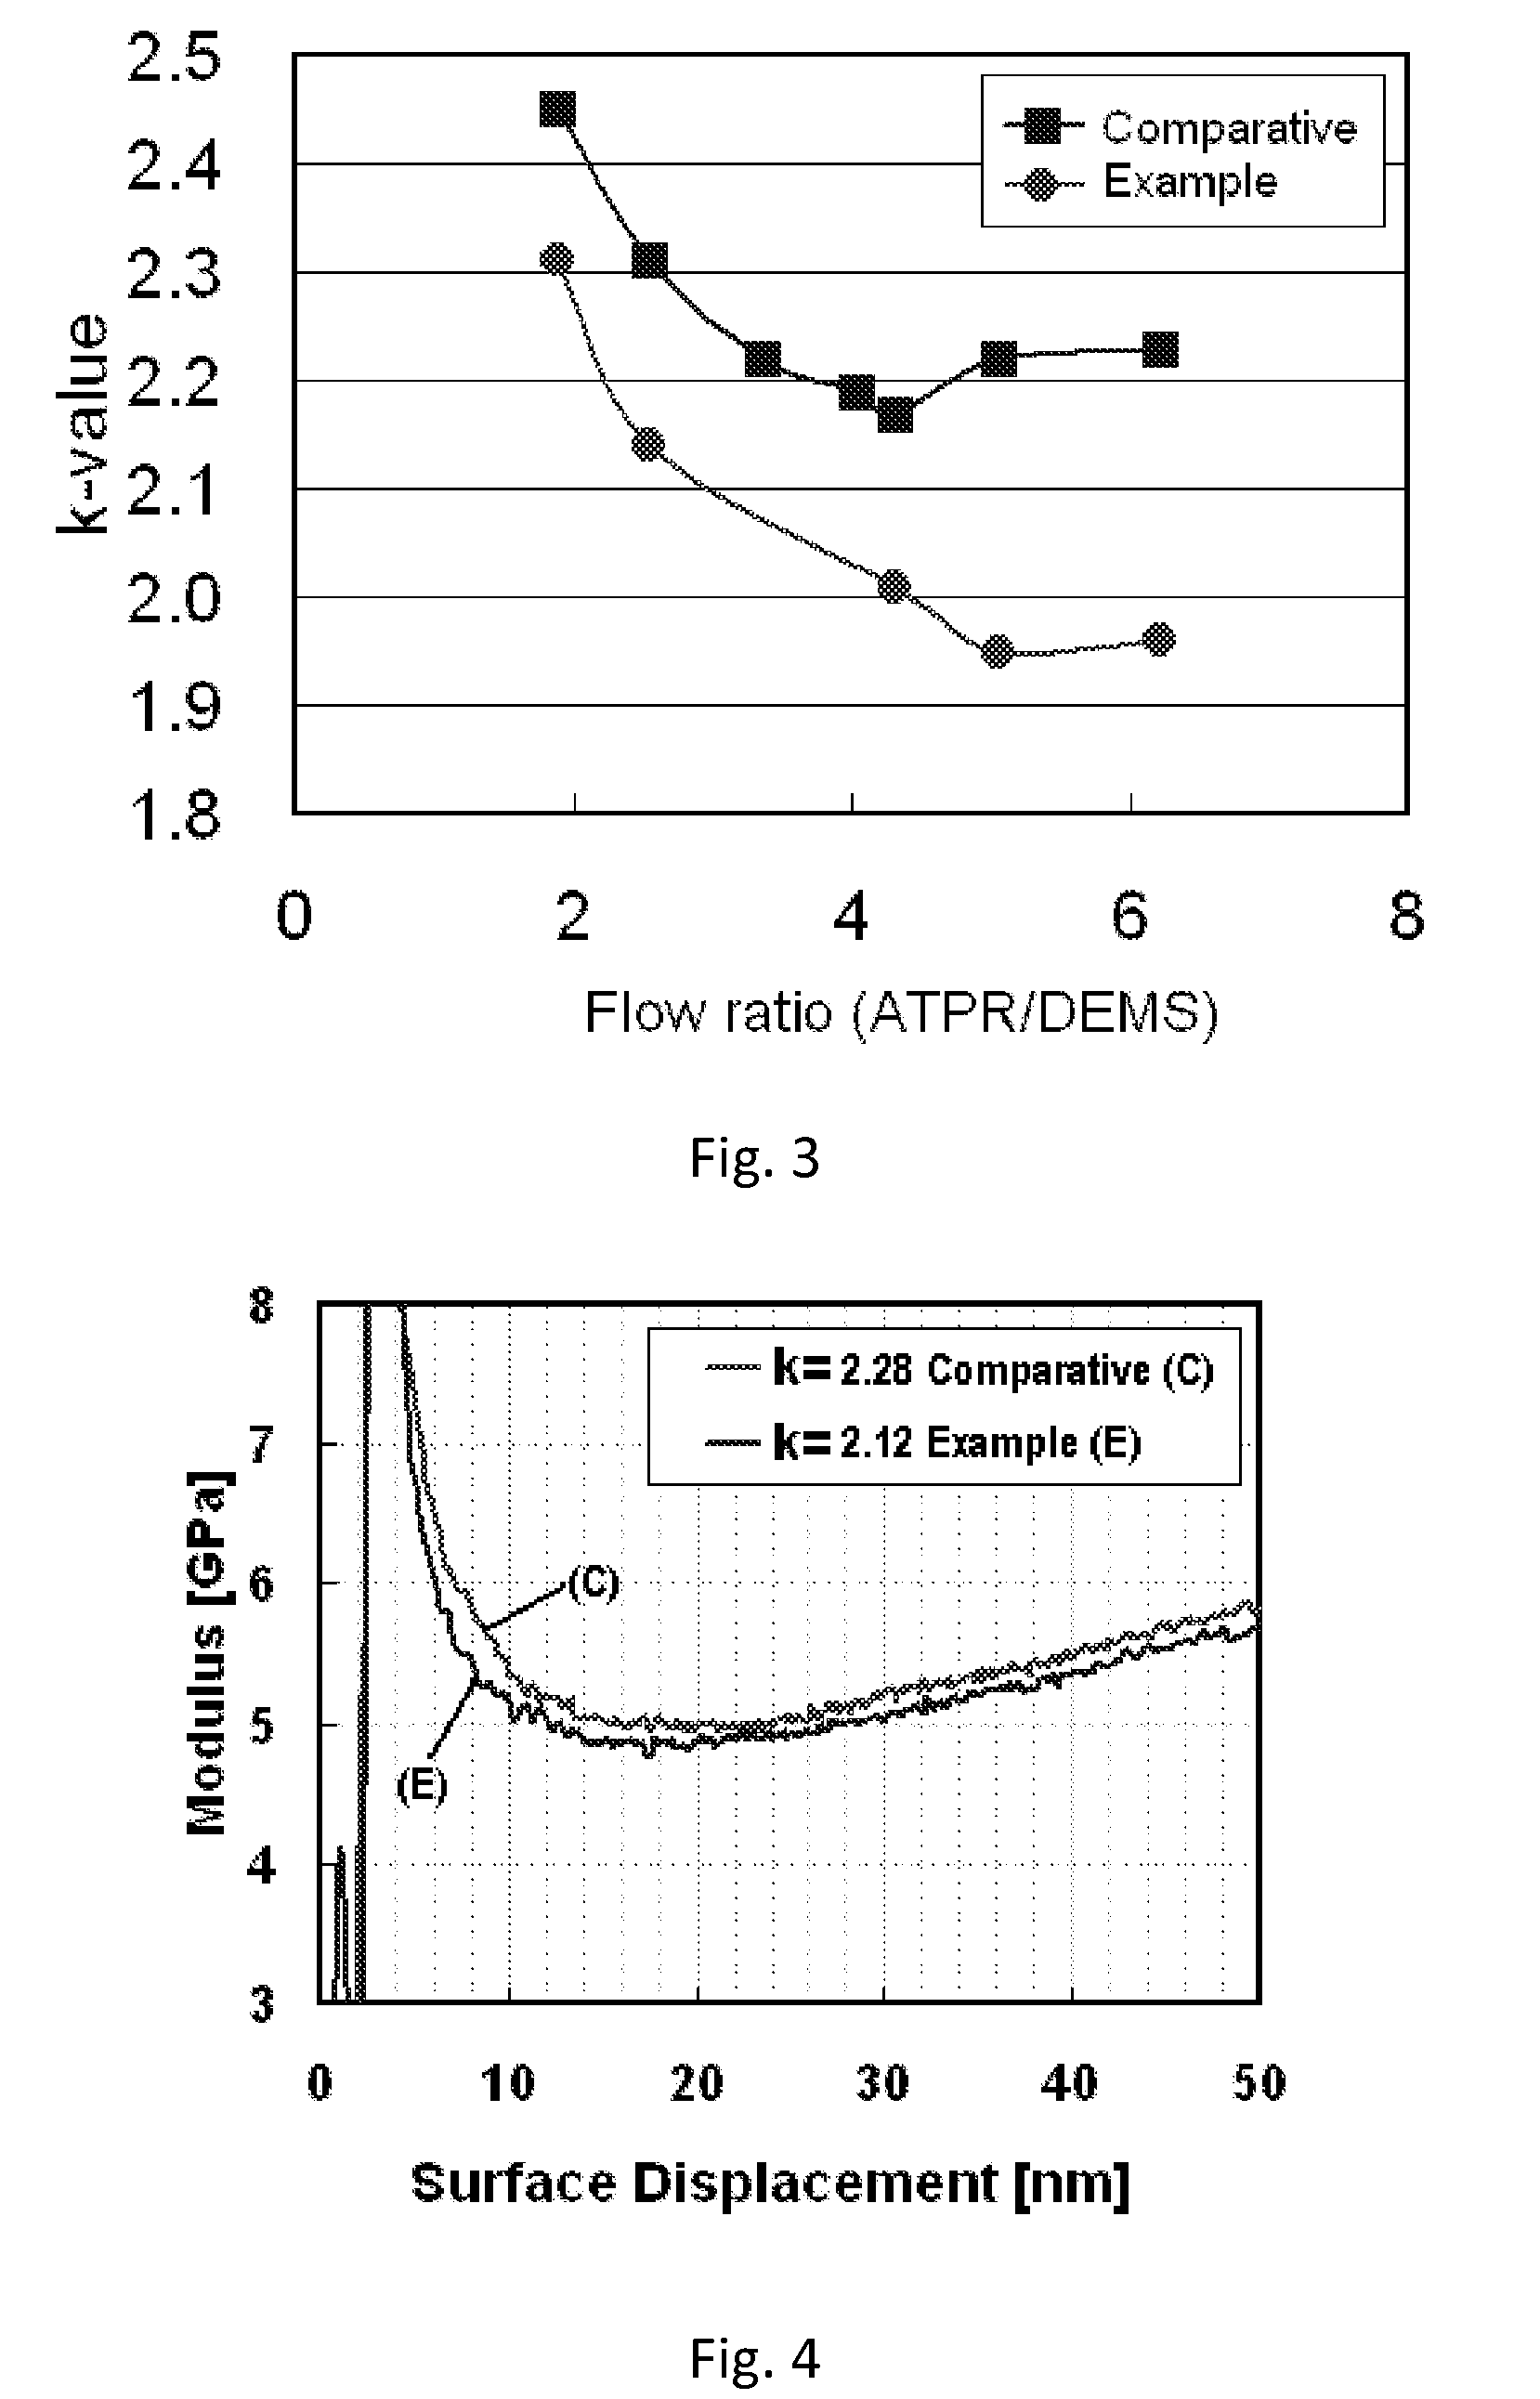 Method for reducing dielectric constant of film using direct plasma of hydrogen